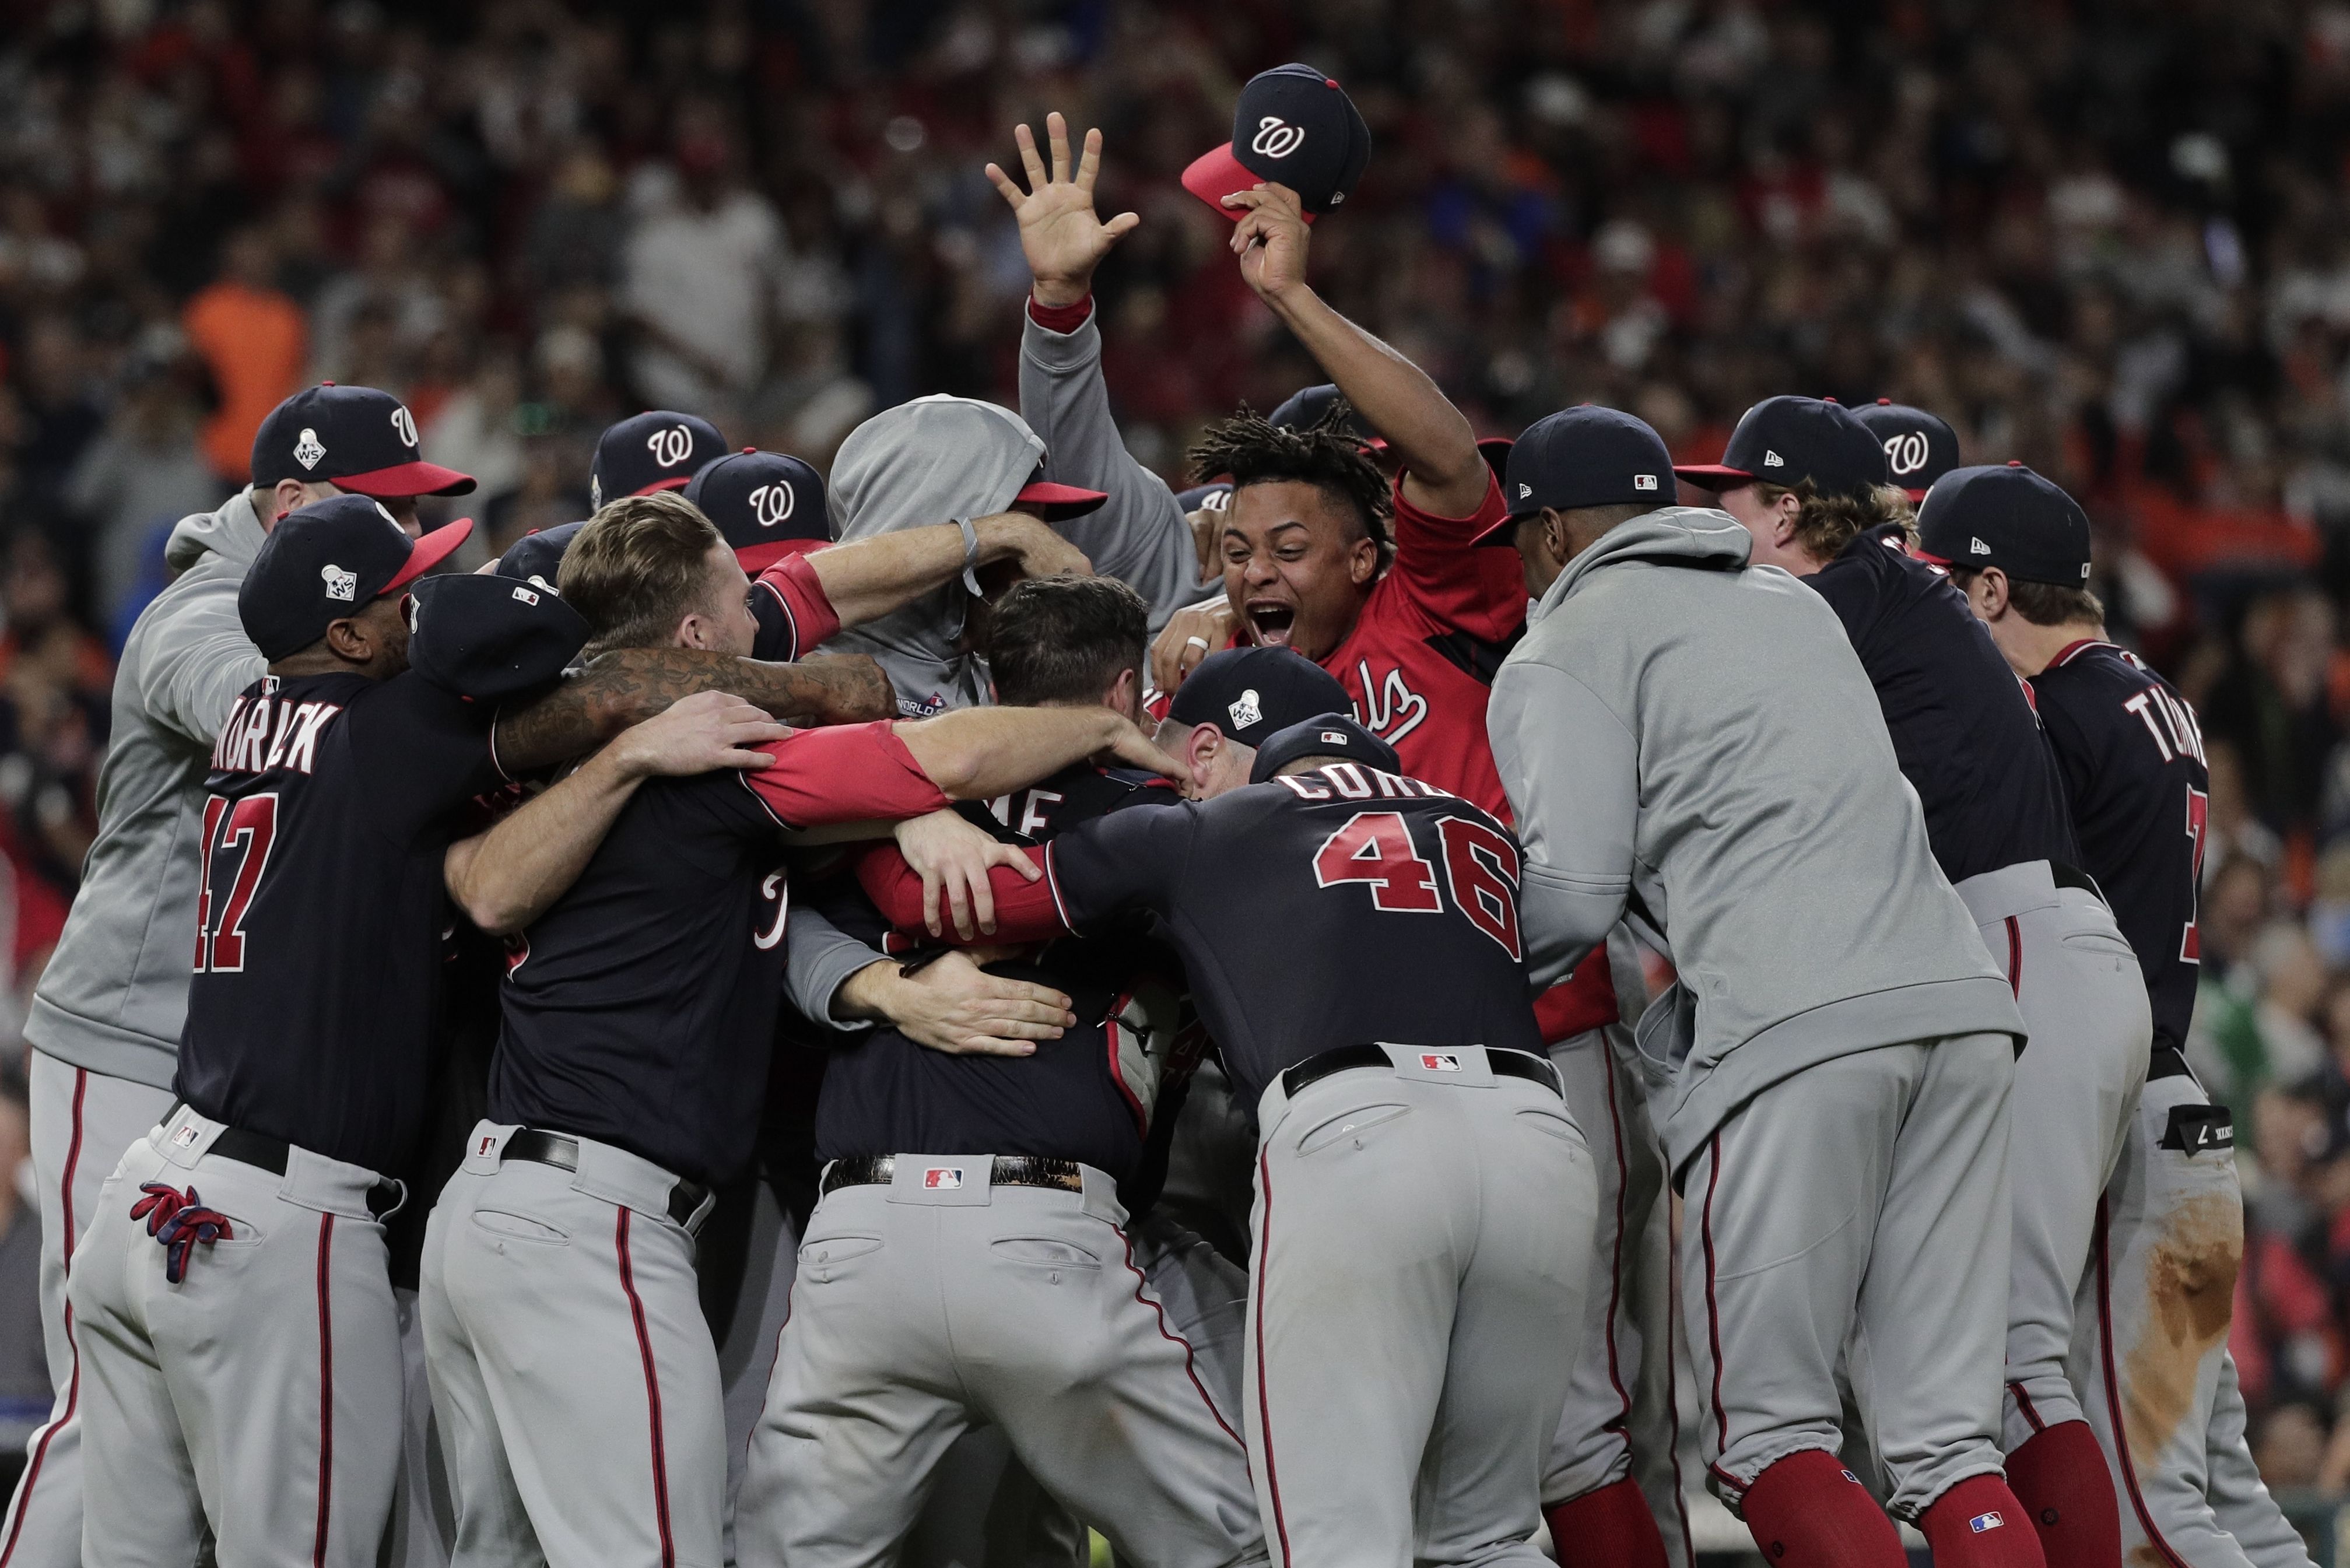 The Nationals are going to the World Series — and a city's